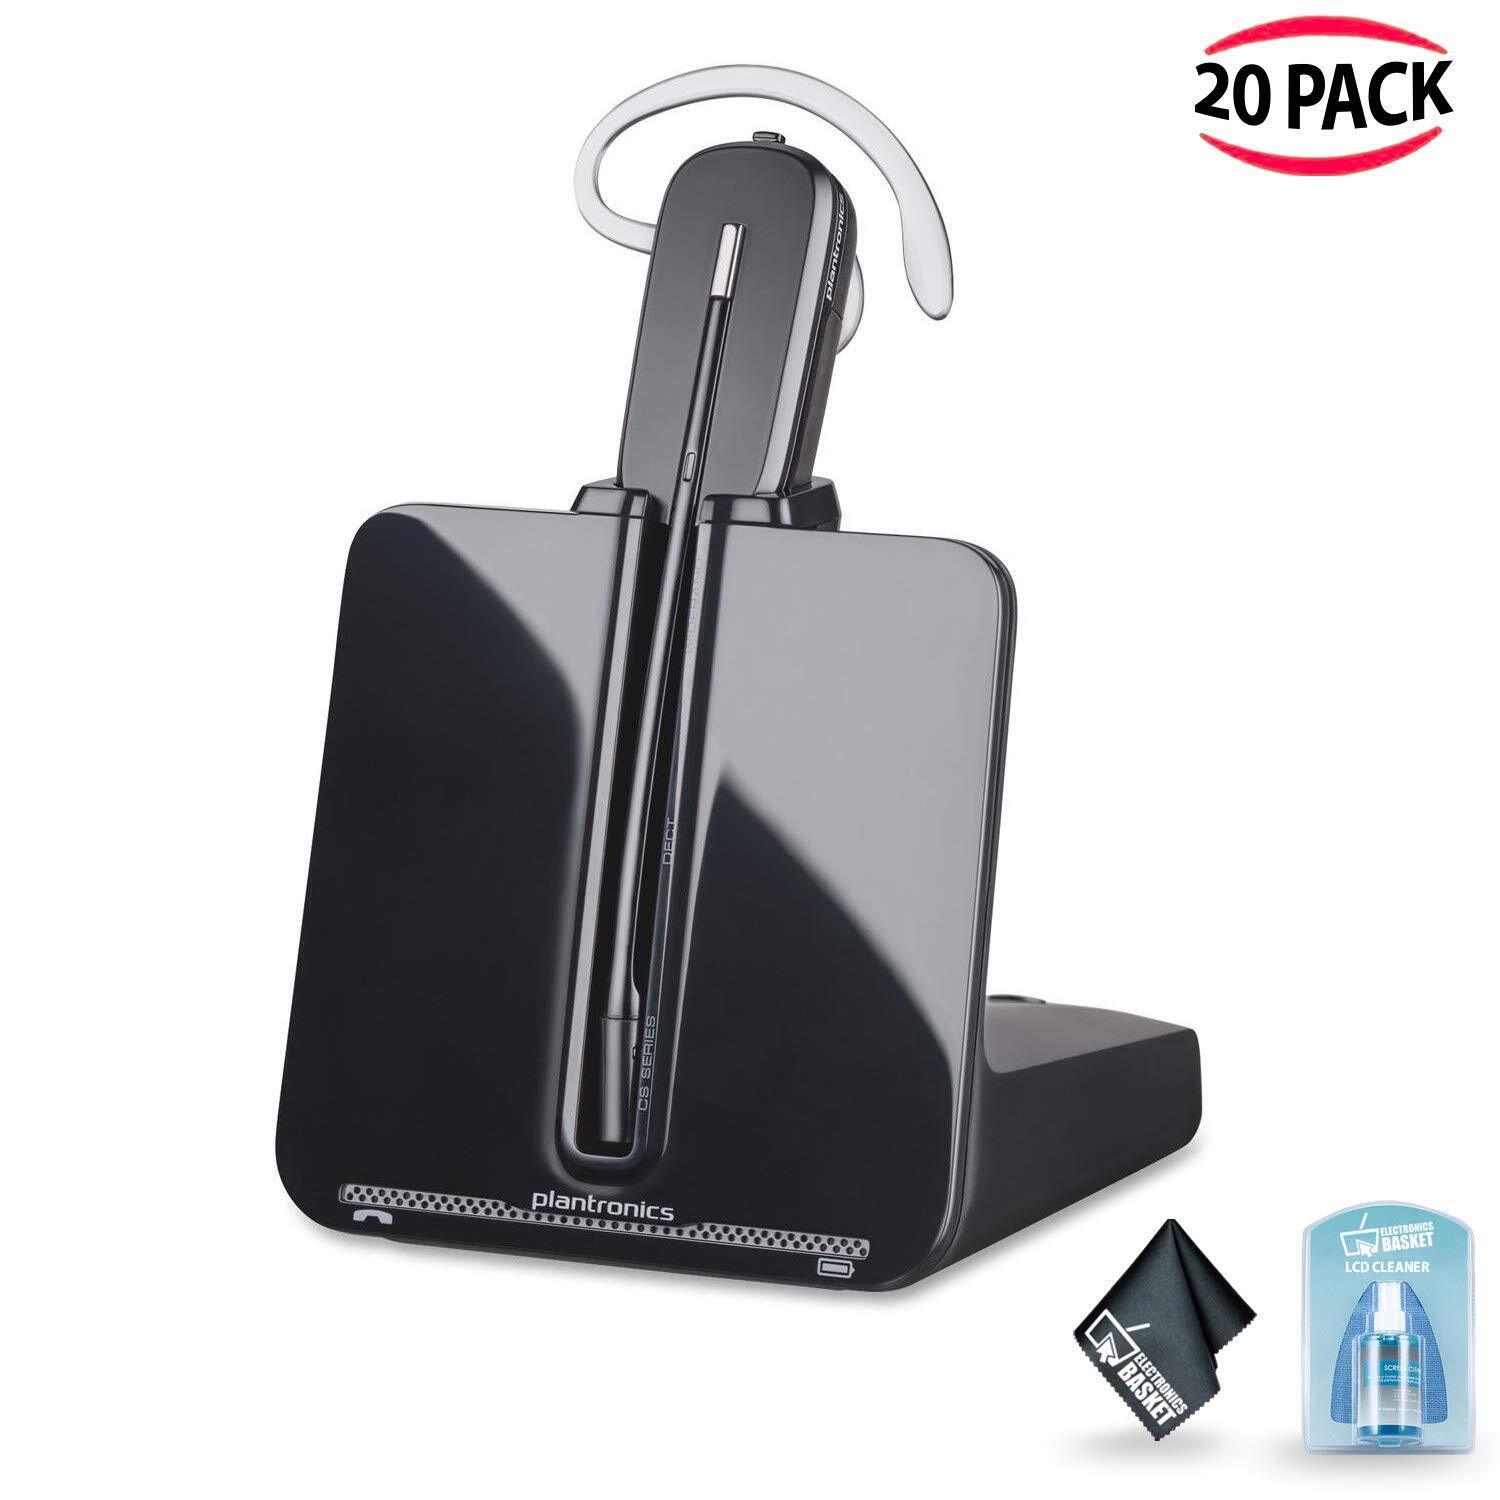 Plantronics CS540 Wireless Headset with HL10 Handset Lifter with Accessories